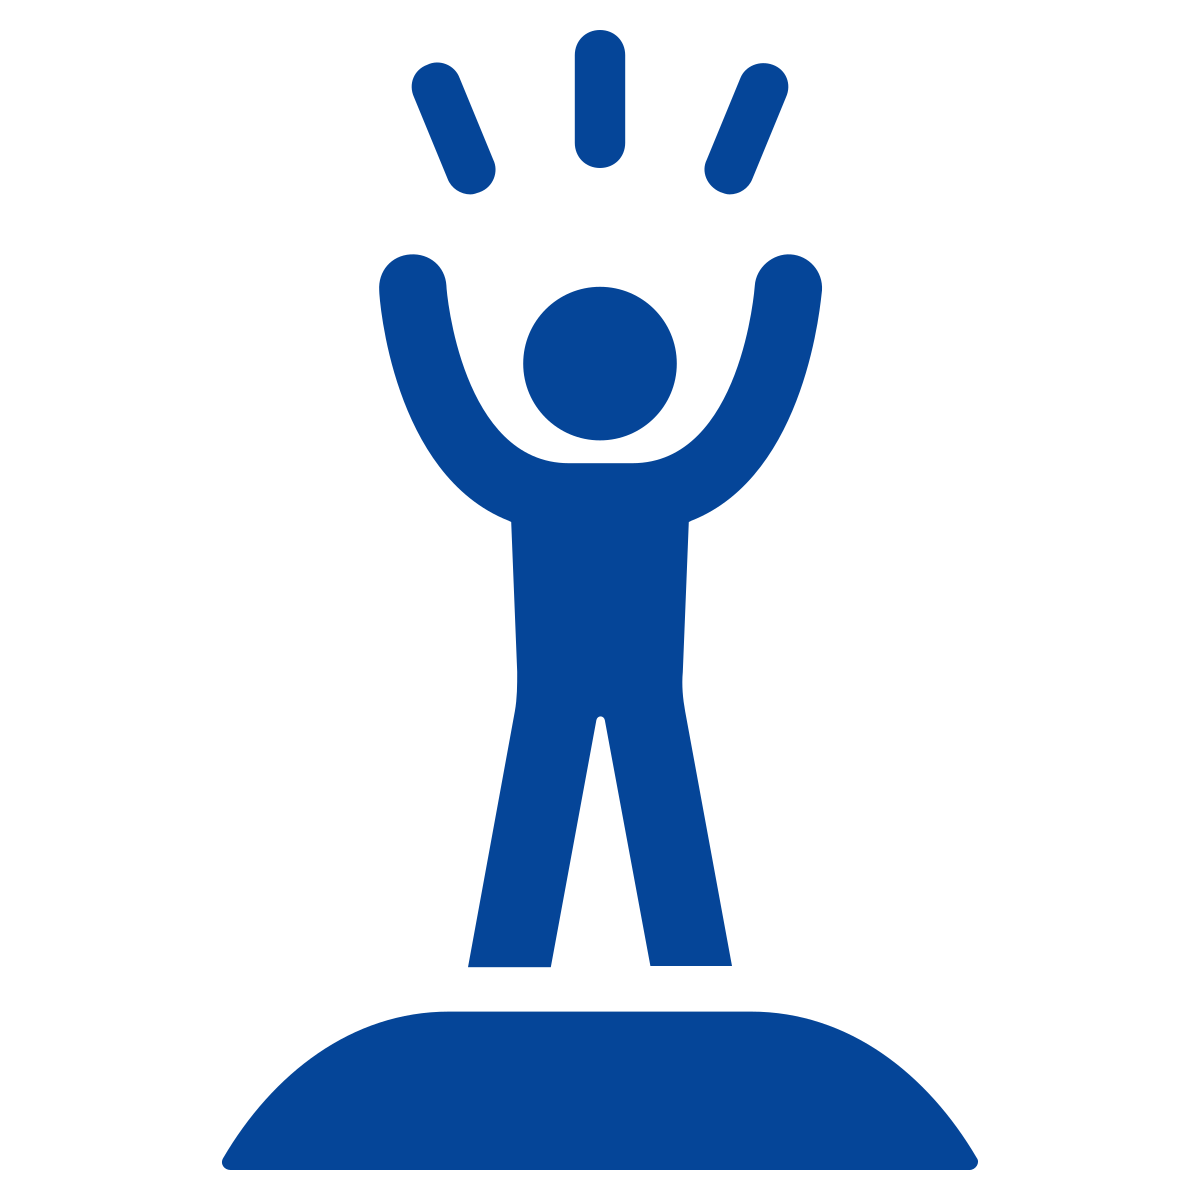 A blue symbol of a person with their hands up.